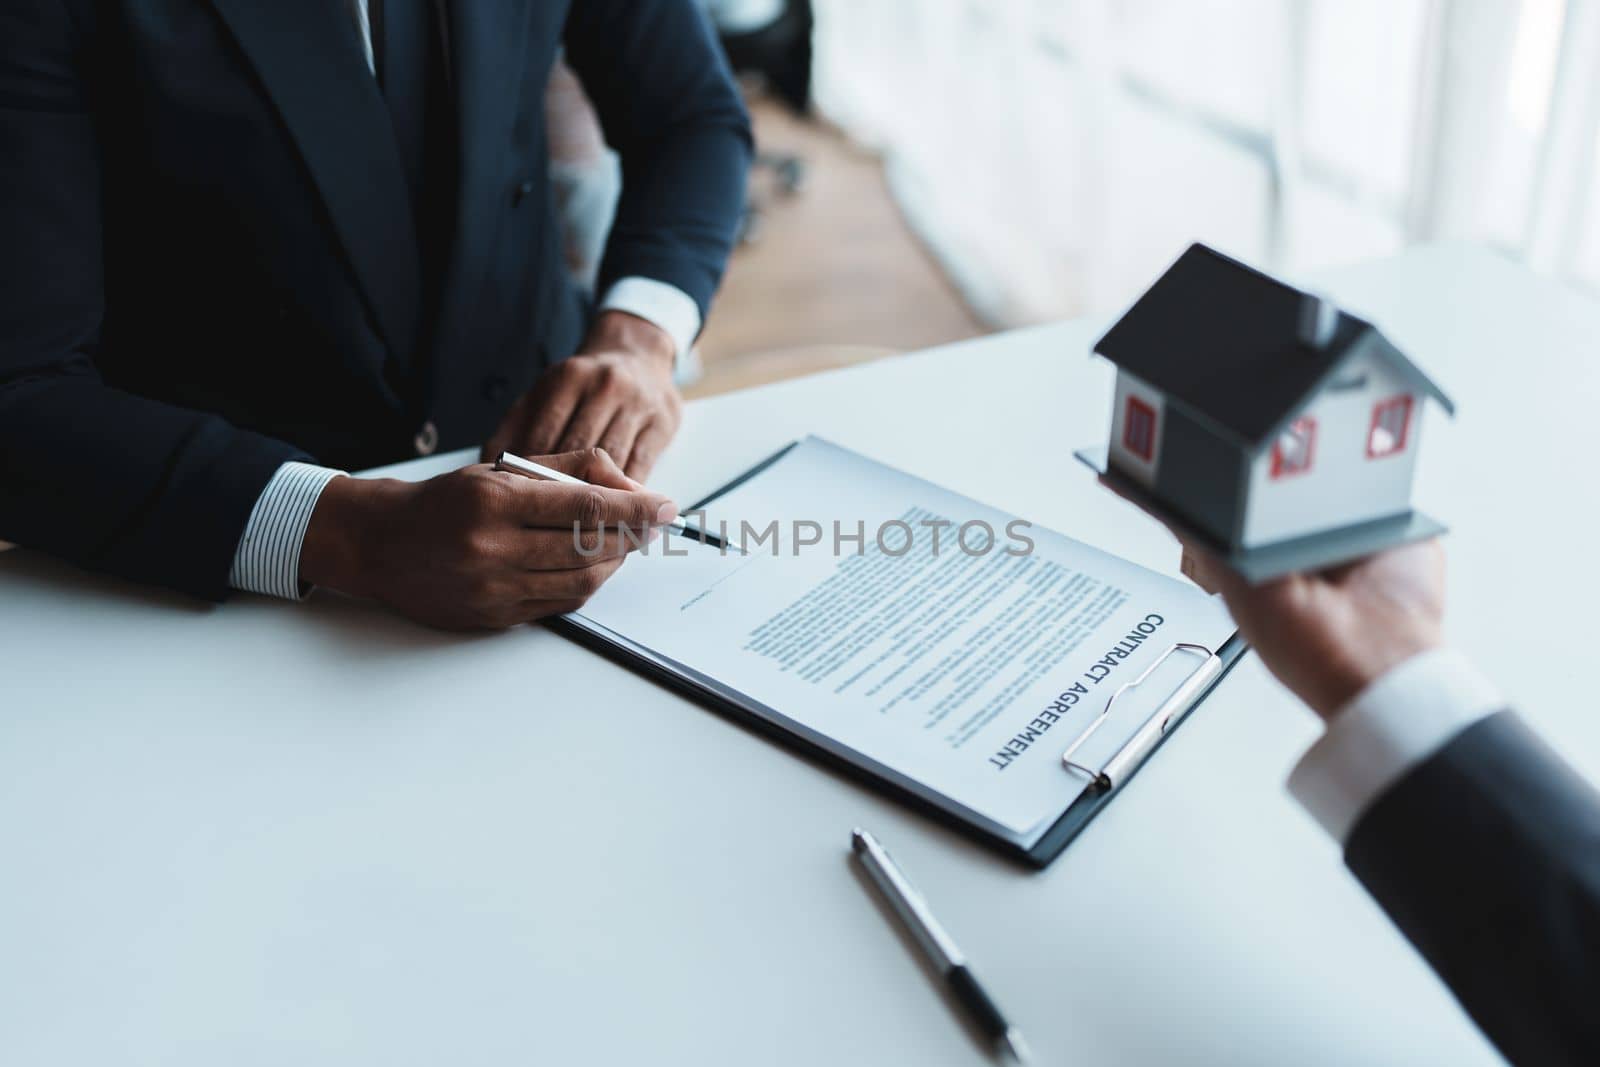 Real estate company to buy houses and land are delivering keys and houses to customers after agreeing to make a home purchase agreement and make a loan agreement